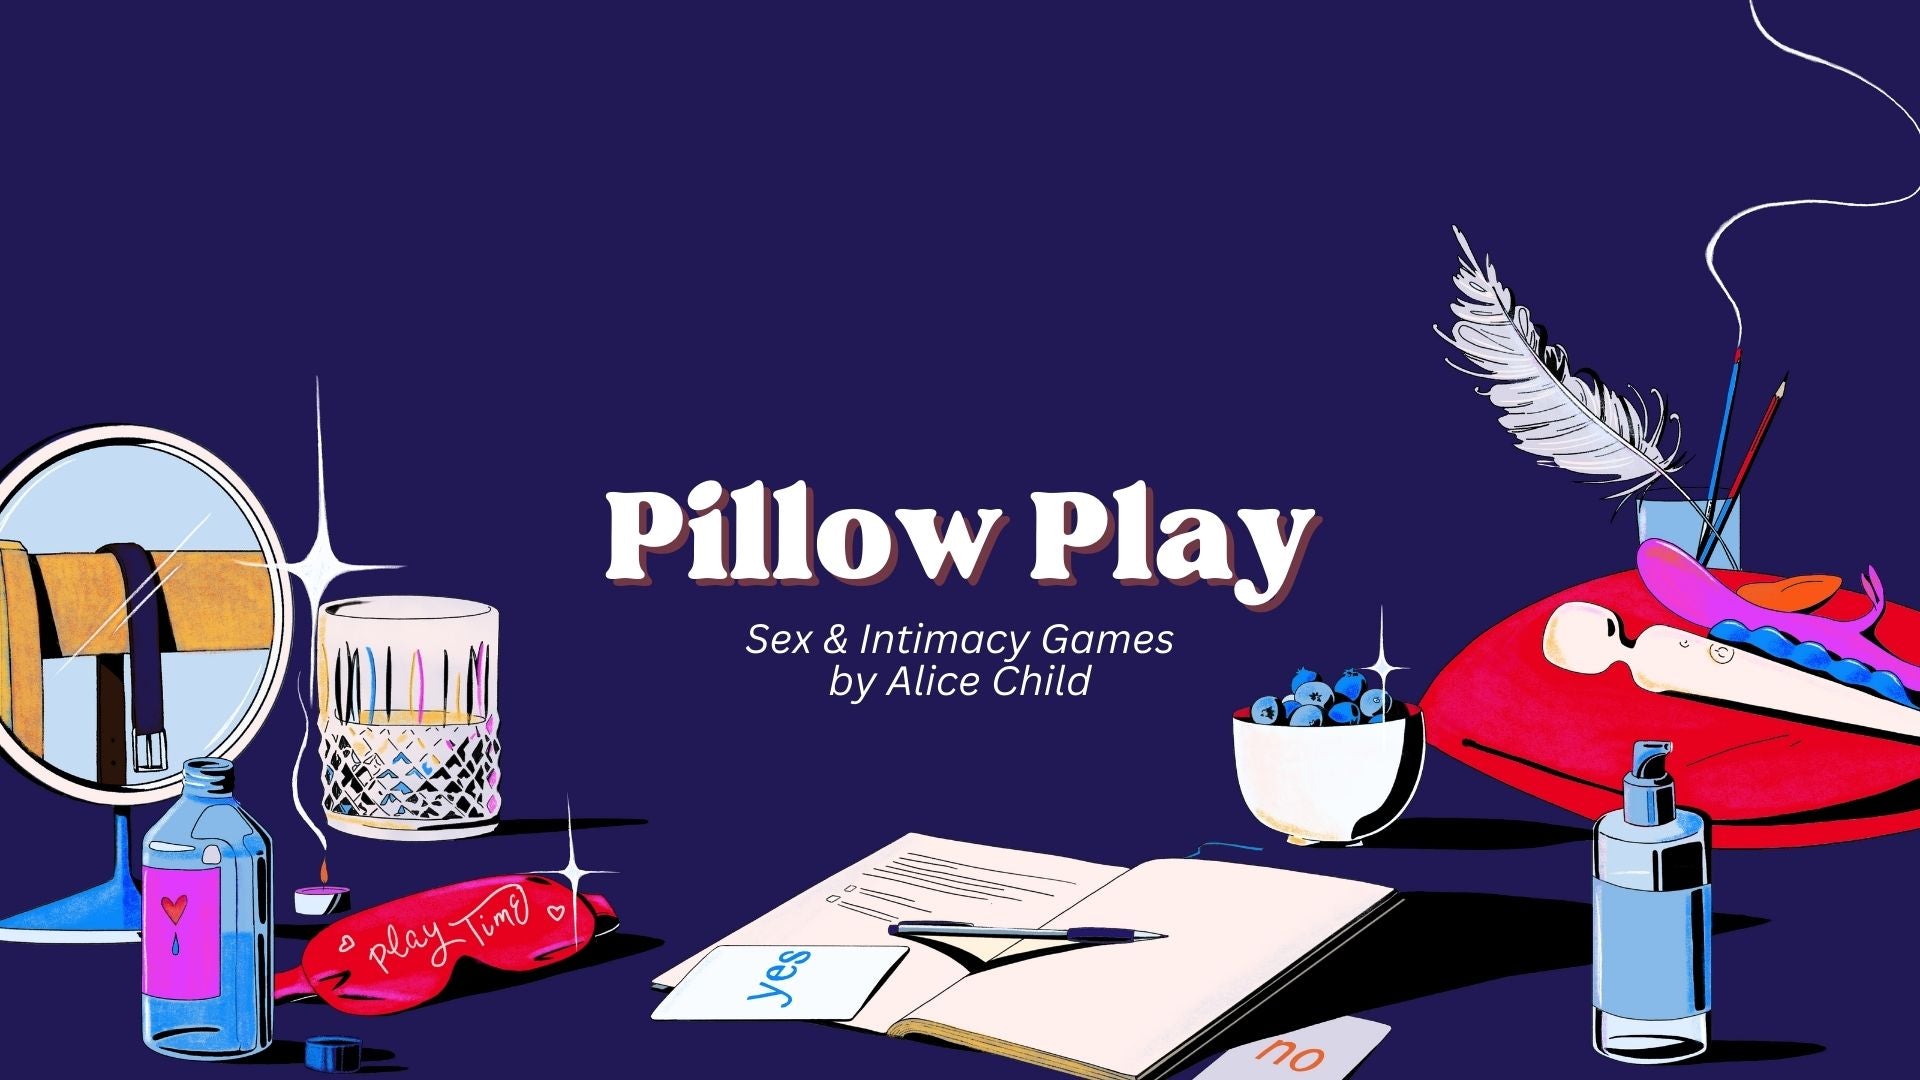 Pillow Play Sex & Intimacy Games